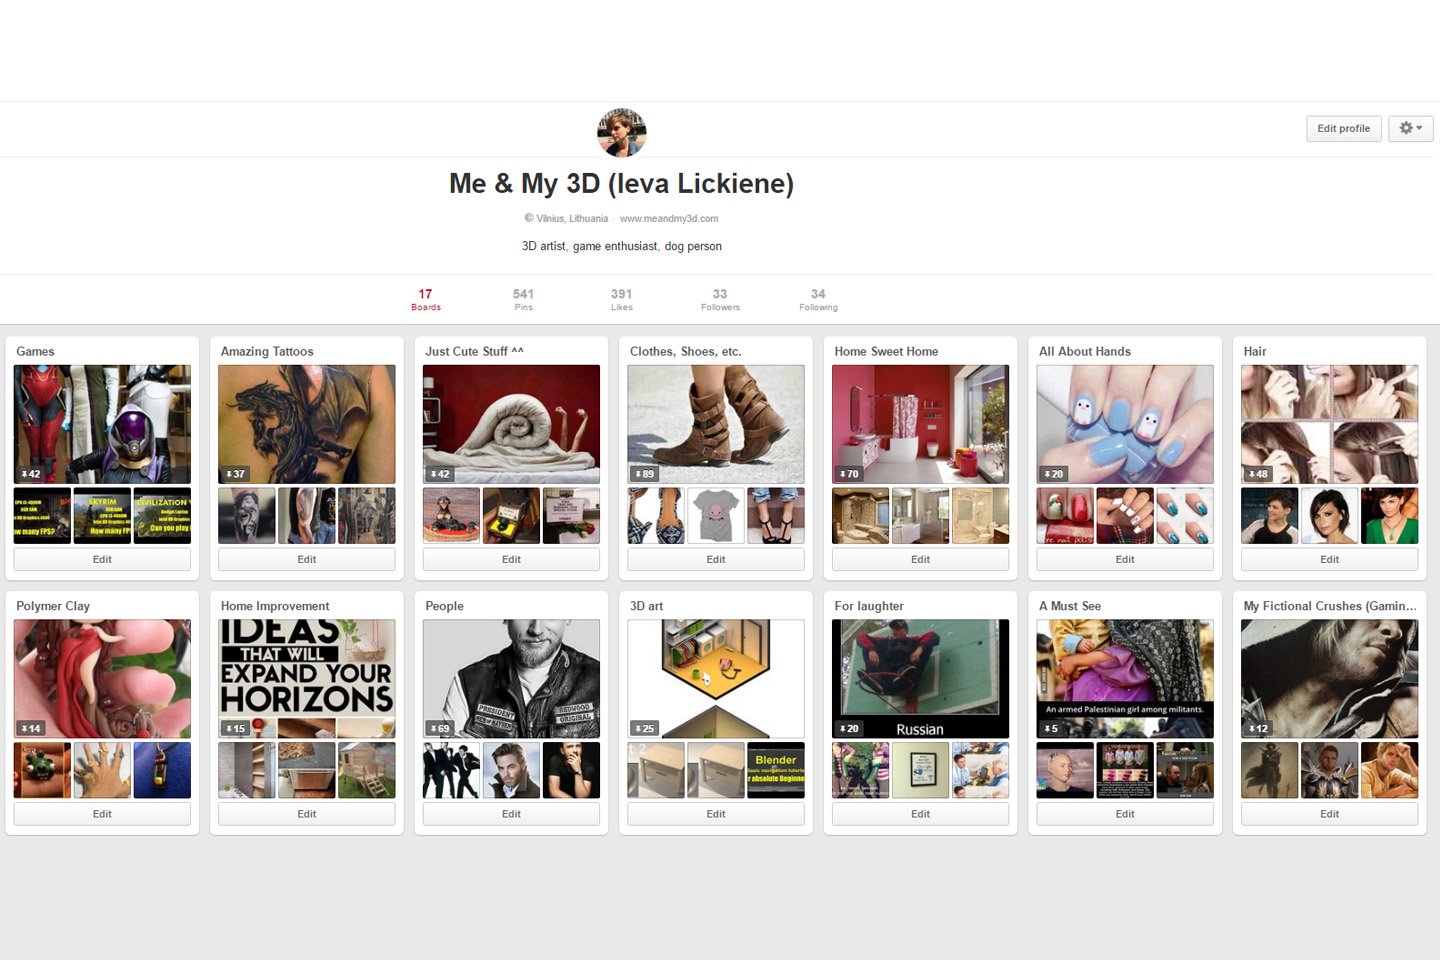 me and my 3D social page on Pinterest